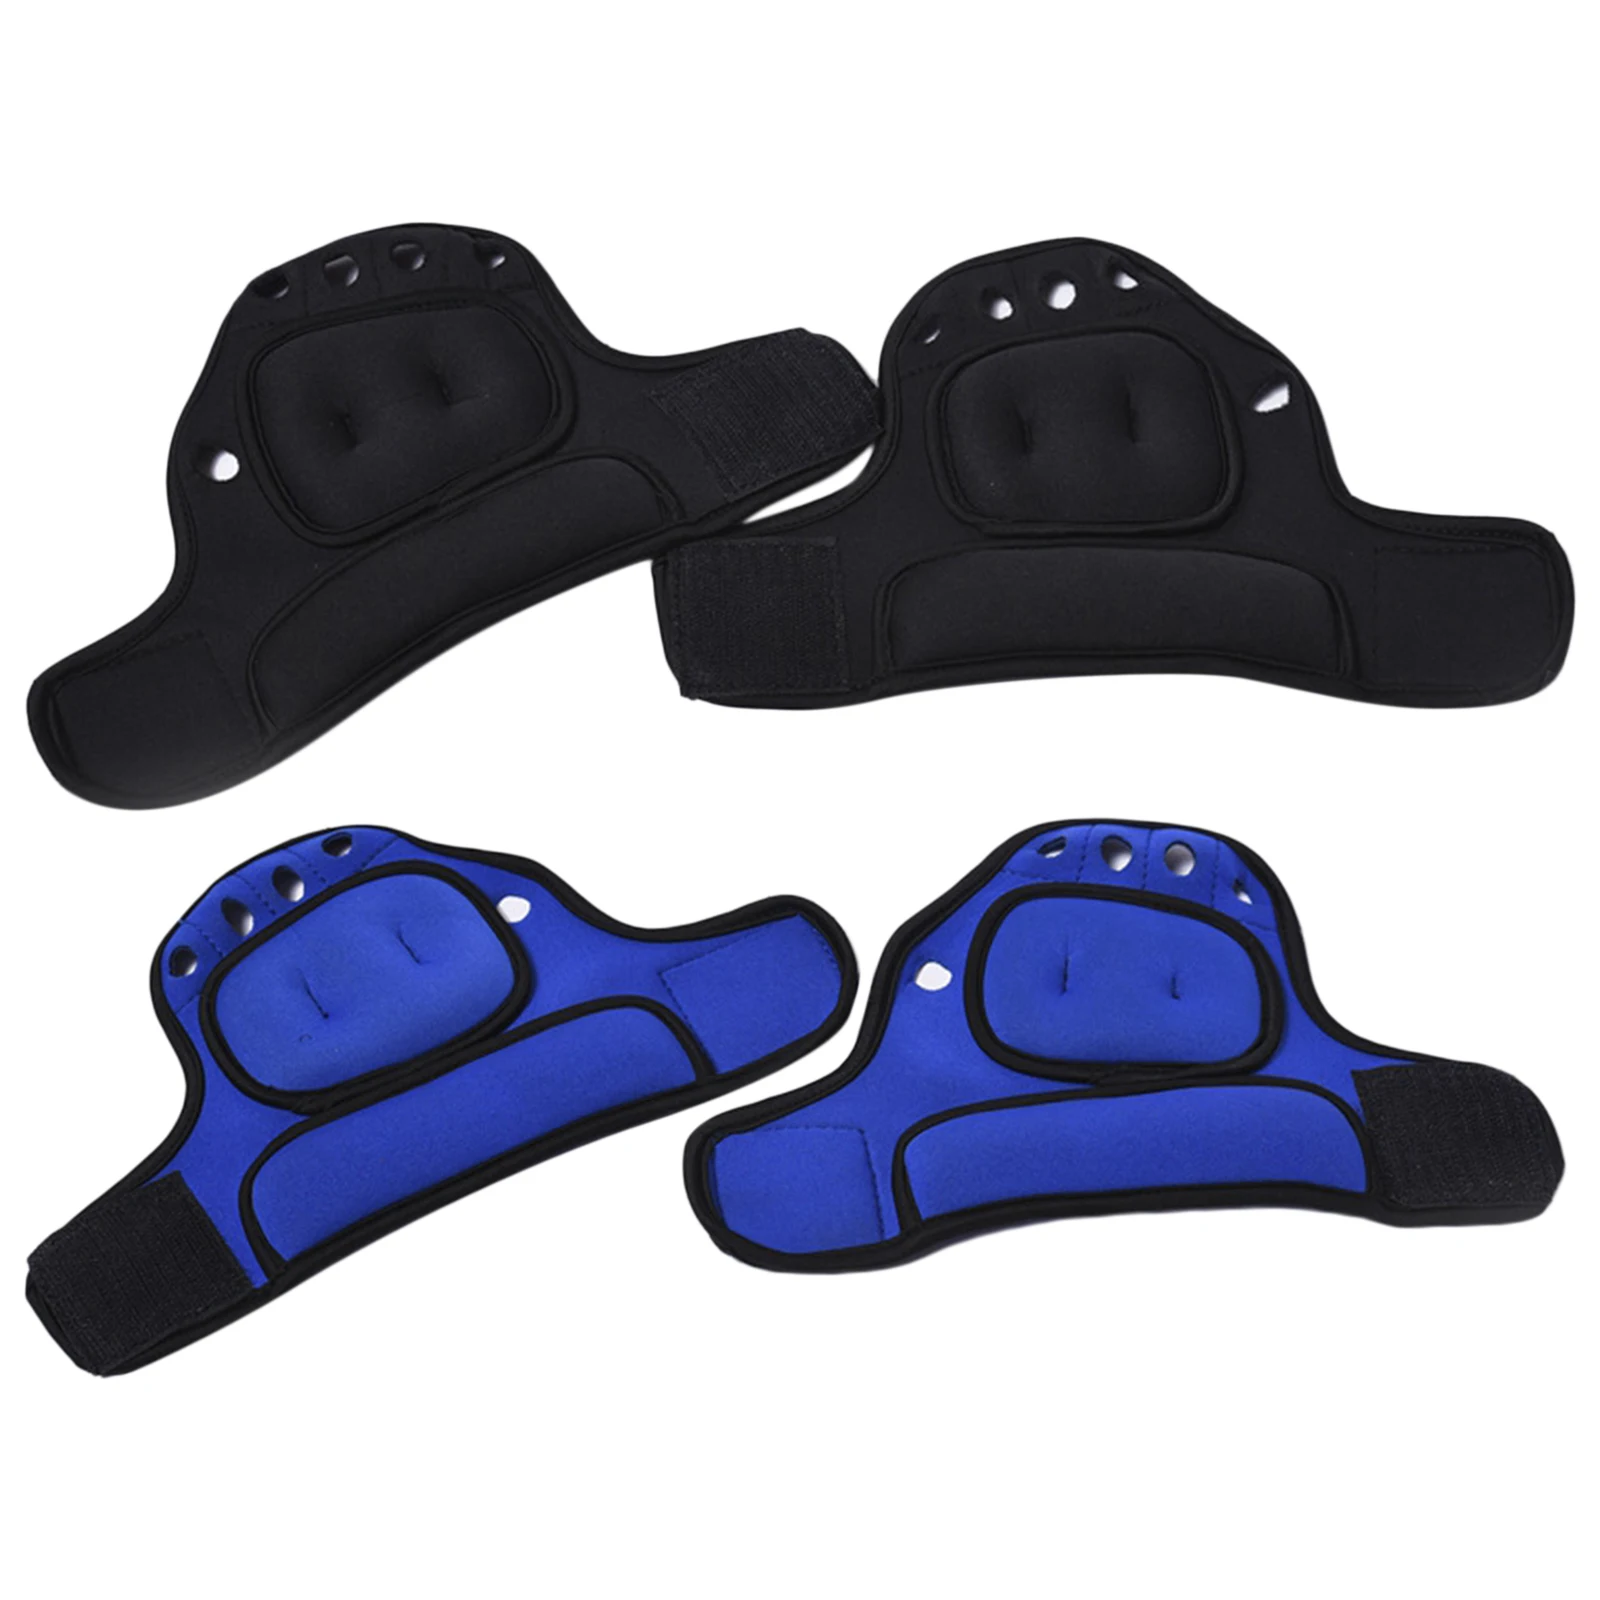 Gym Gloves, Strength Training Weighted Gloves with Wrist Support,Weight lifting